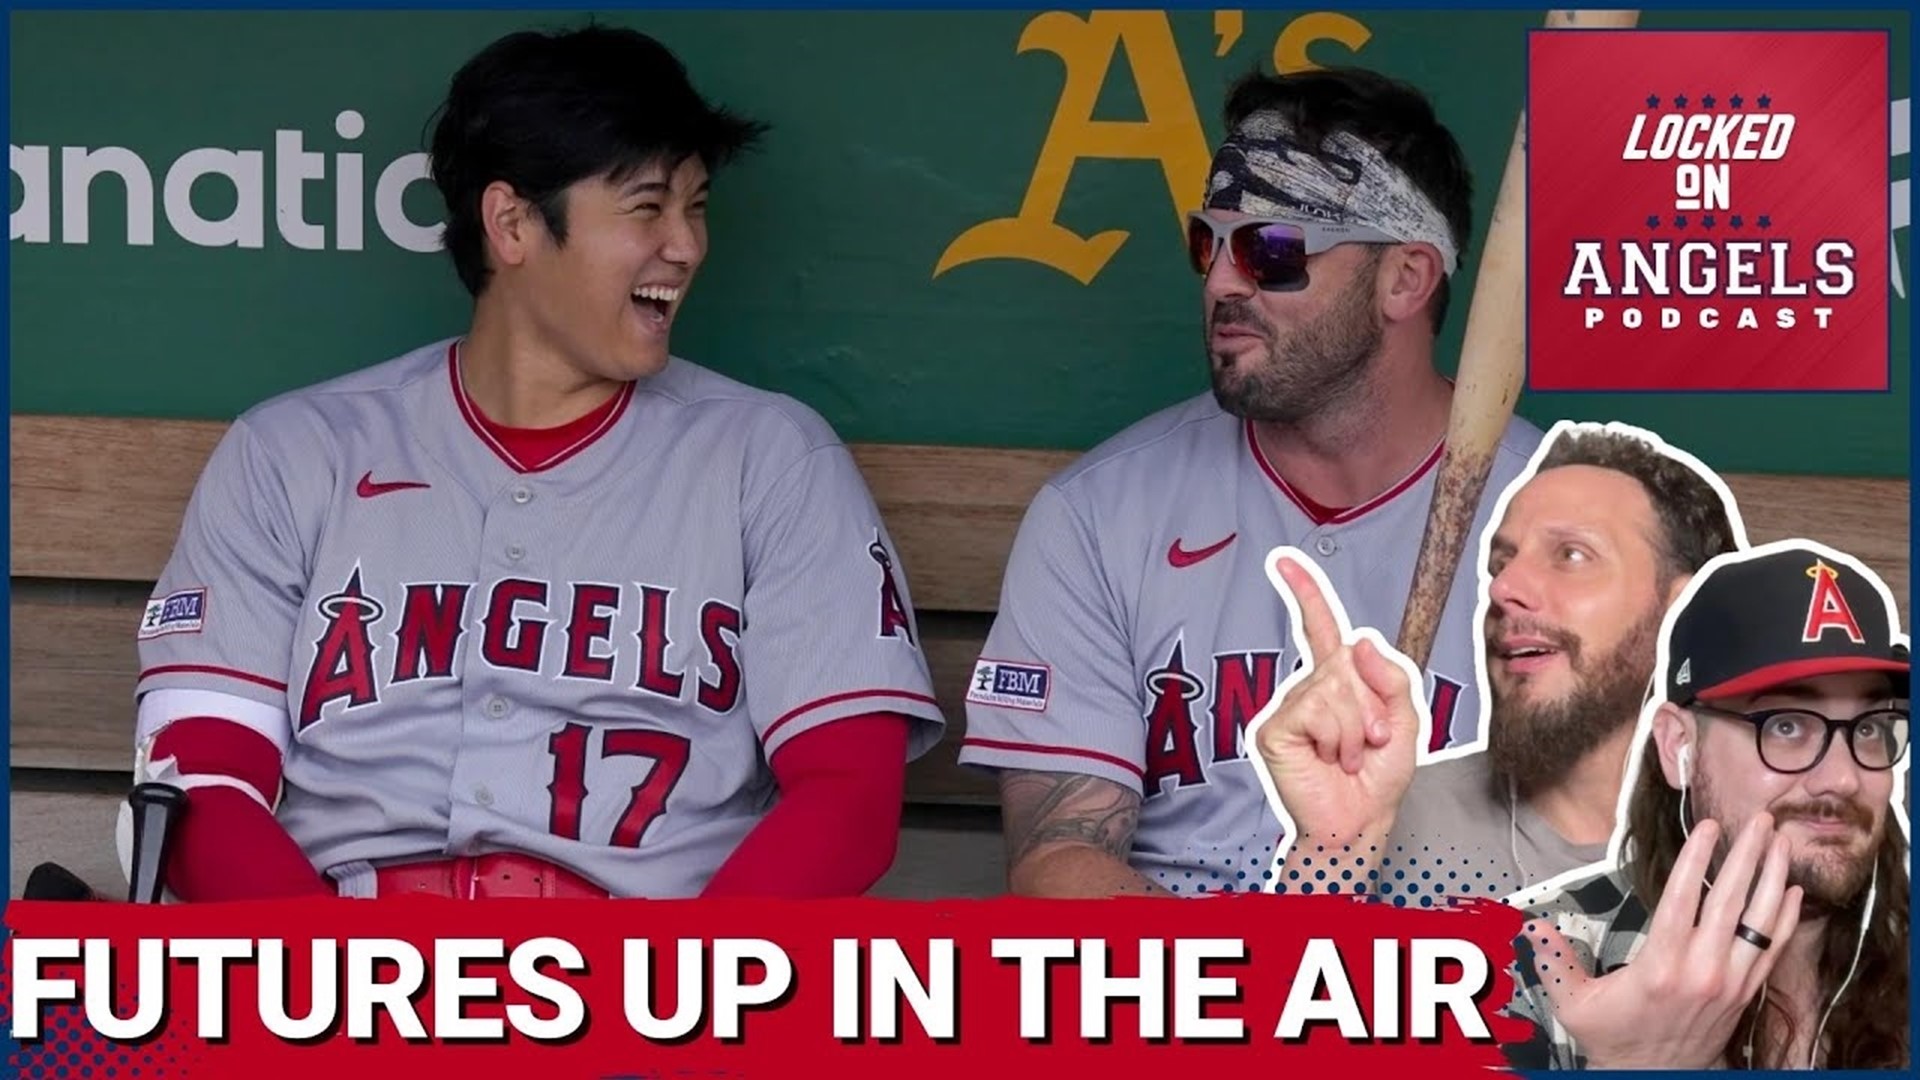 Los Angeles Angels Add FBM Advertisement to Jerseys in 2023